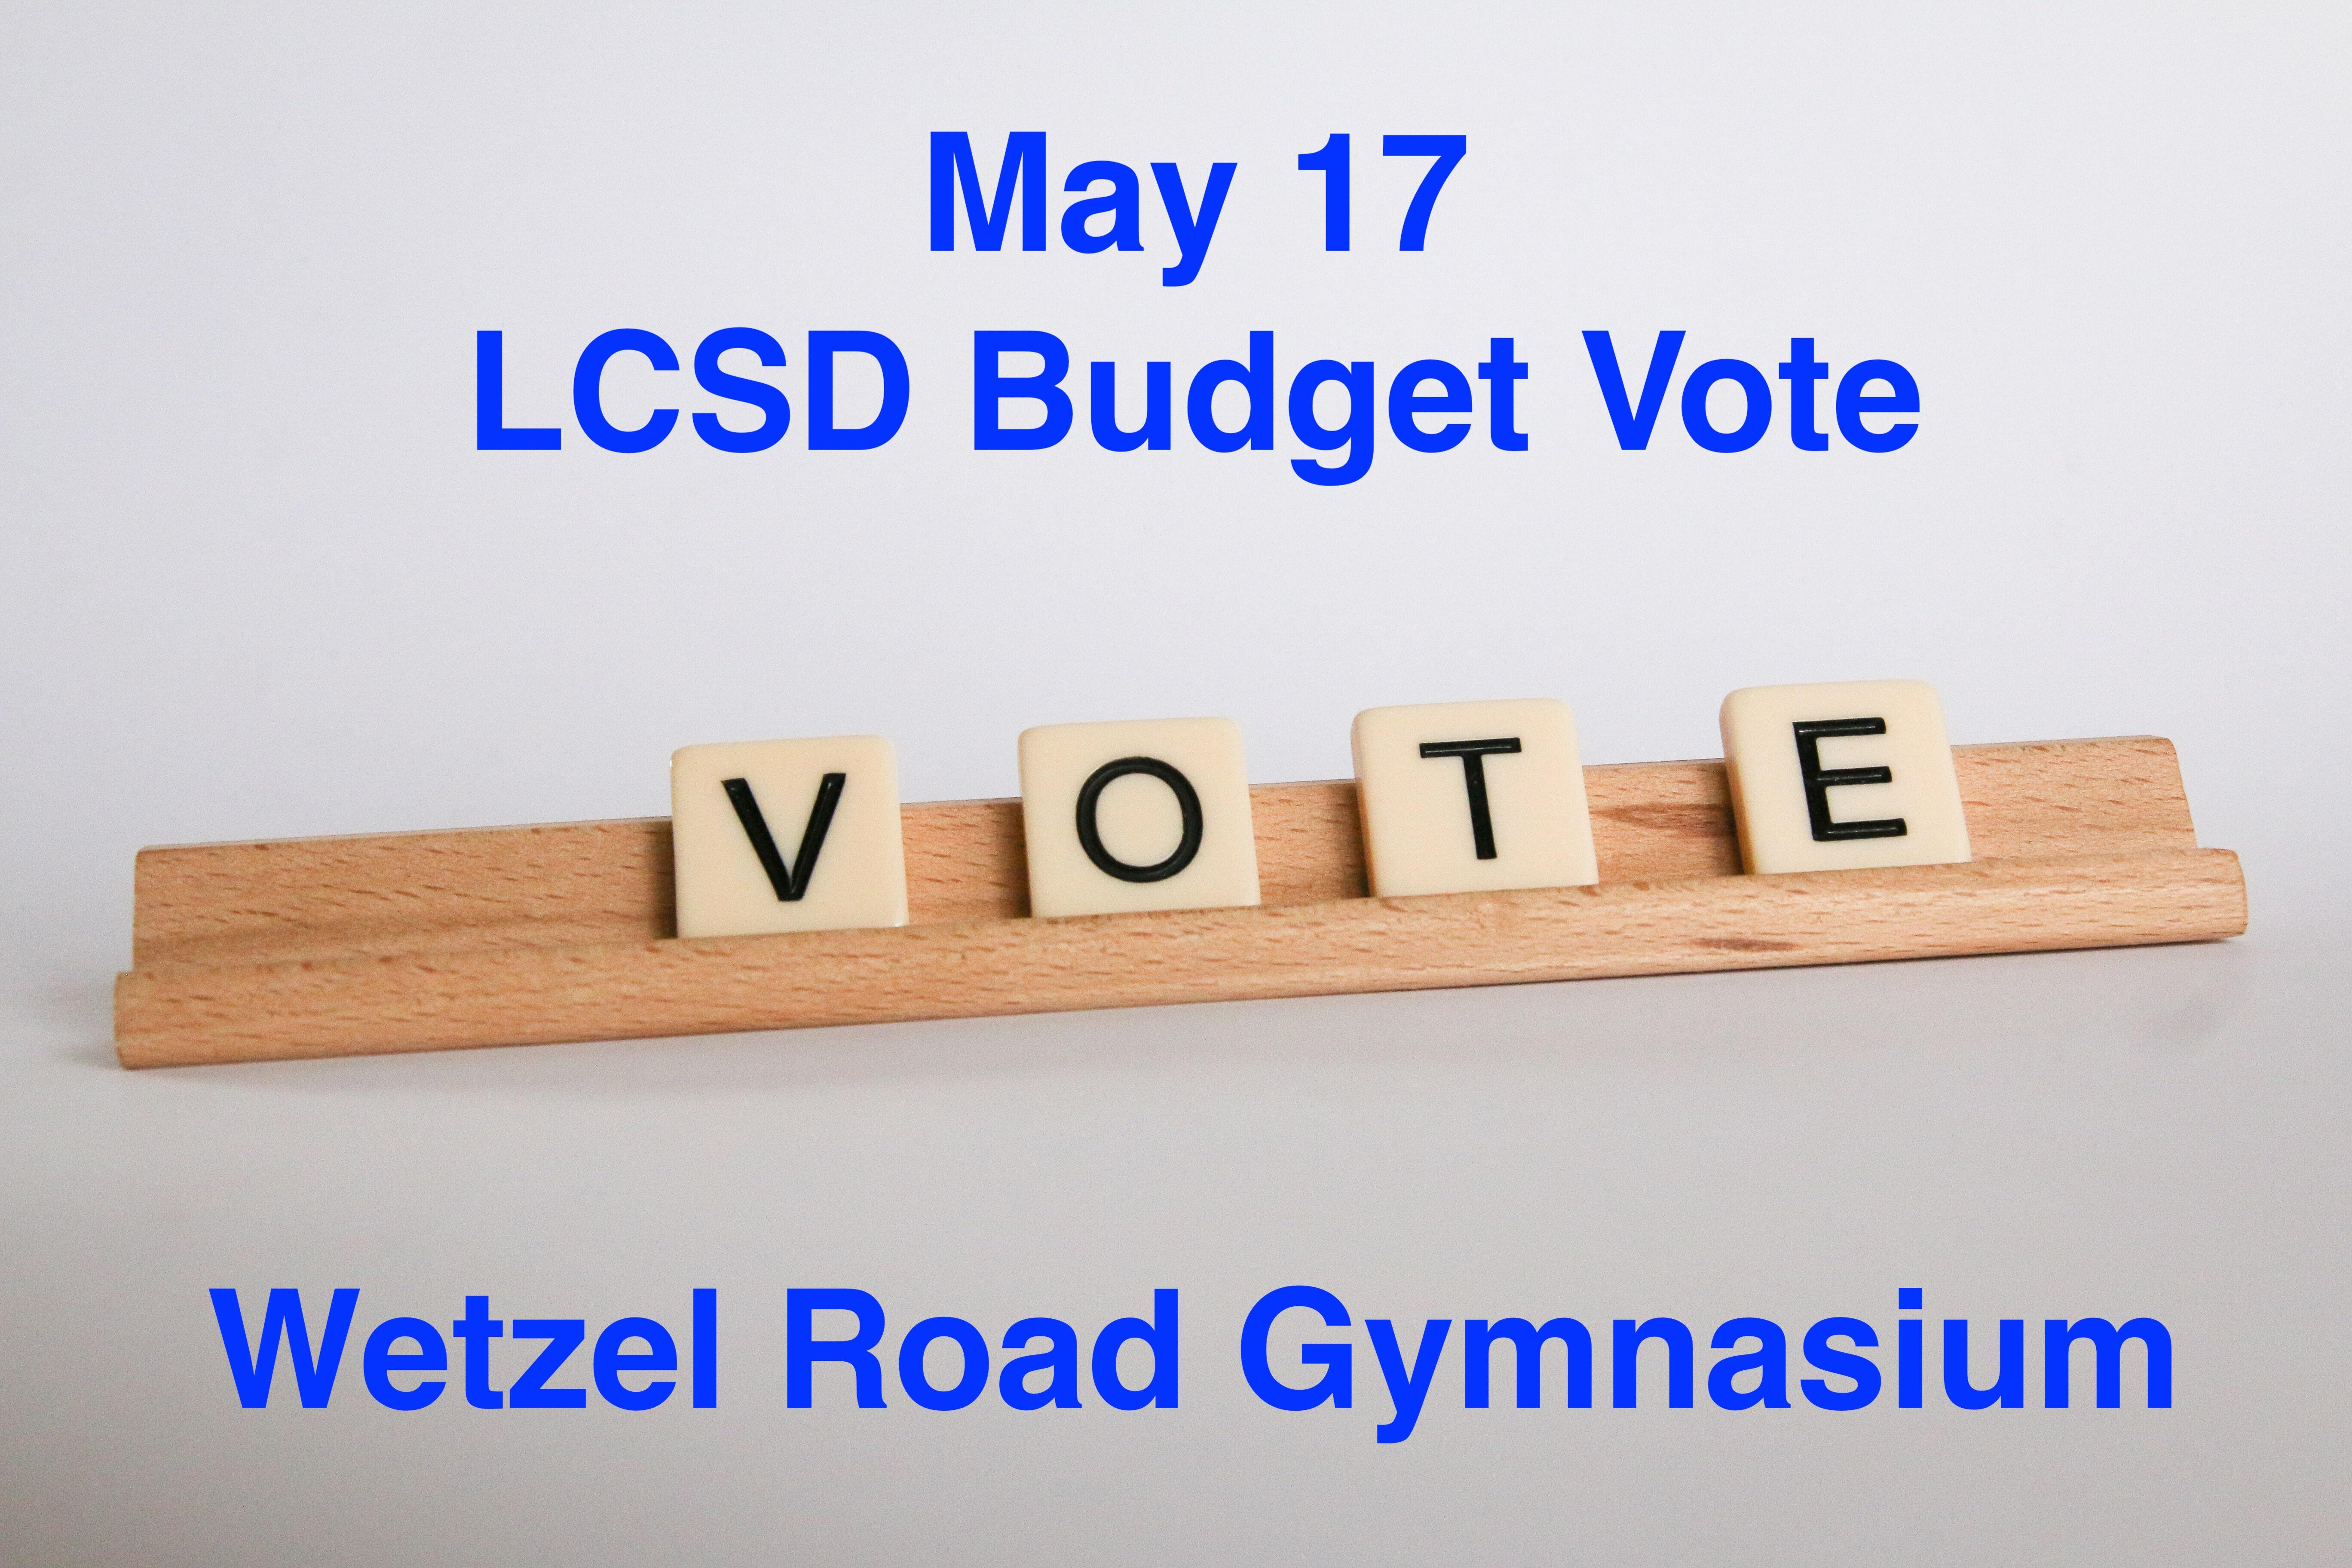 Budget vote May 17